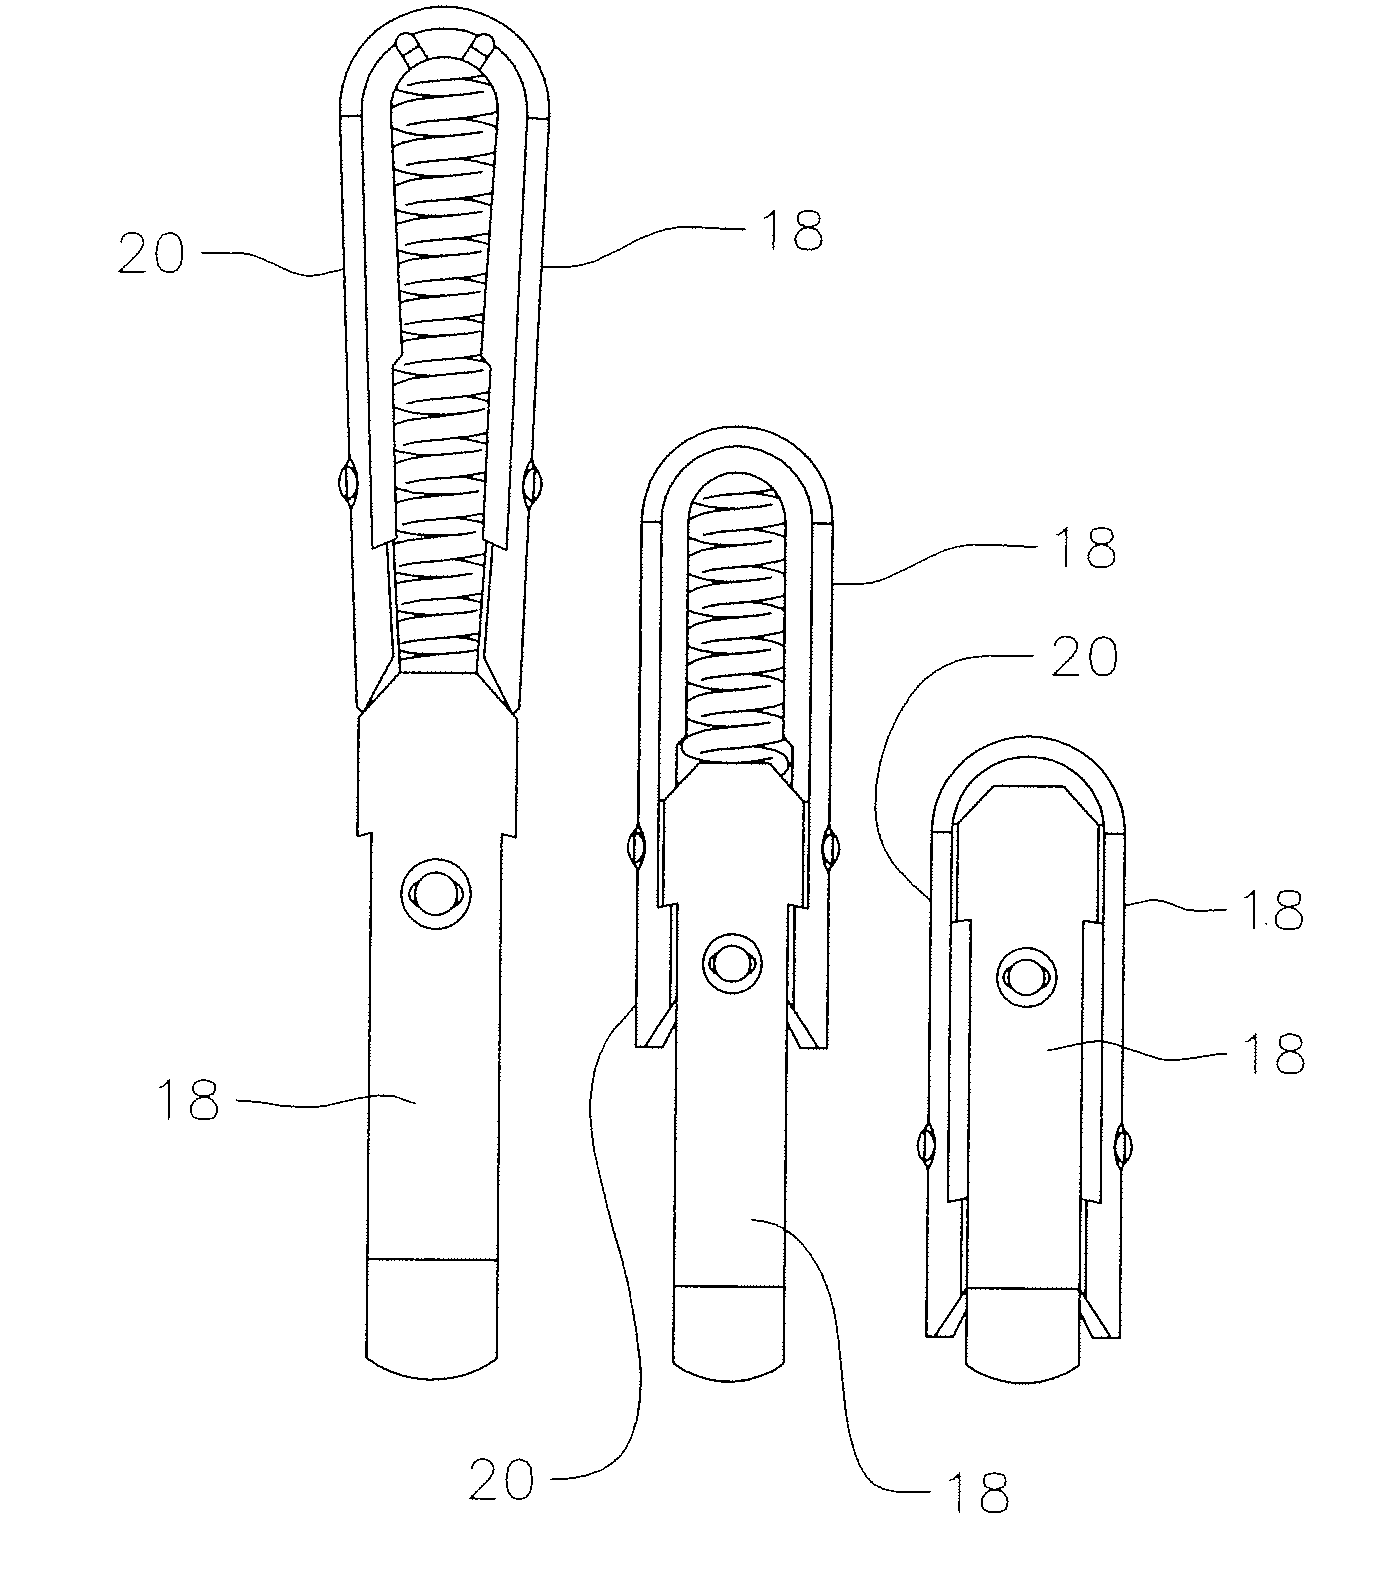 Compliant electrical contact having maximized the internal spring volume